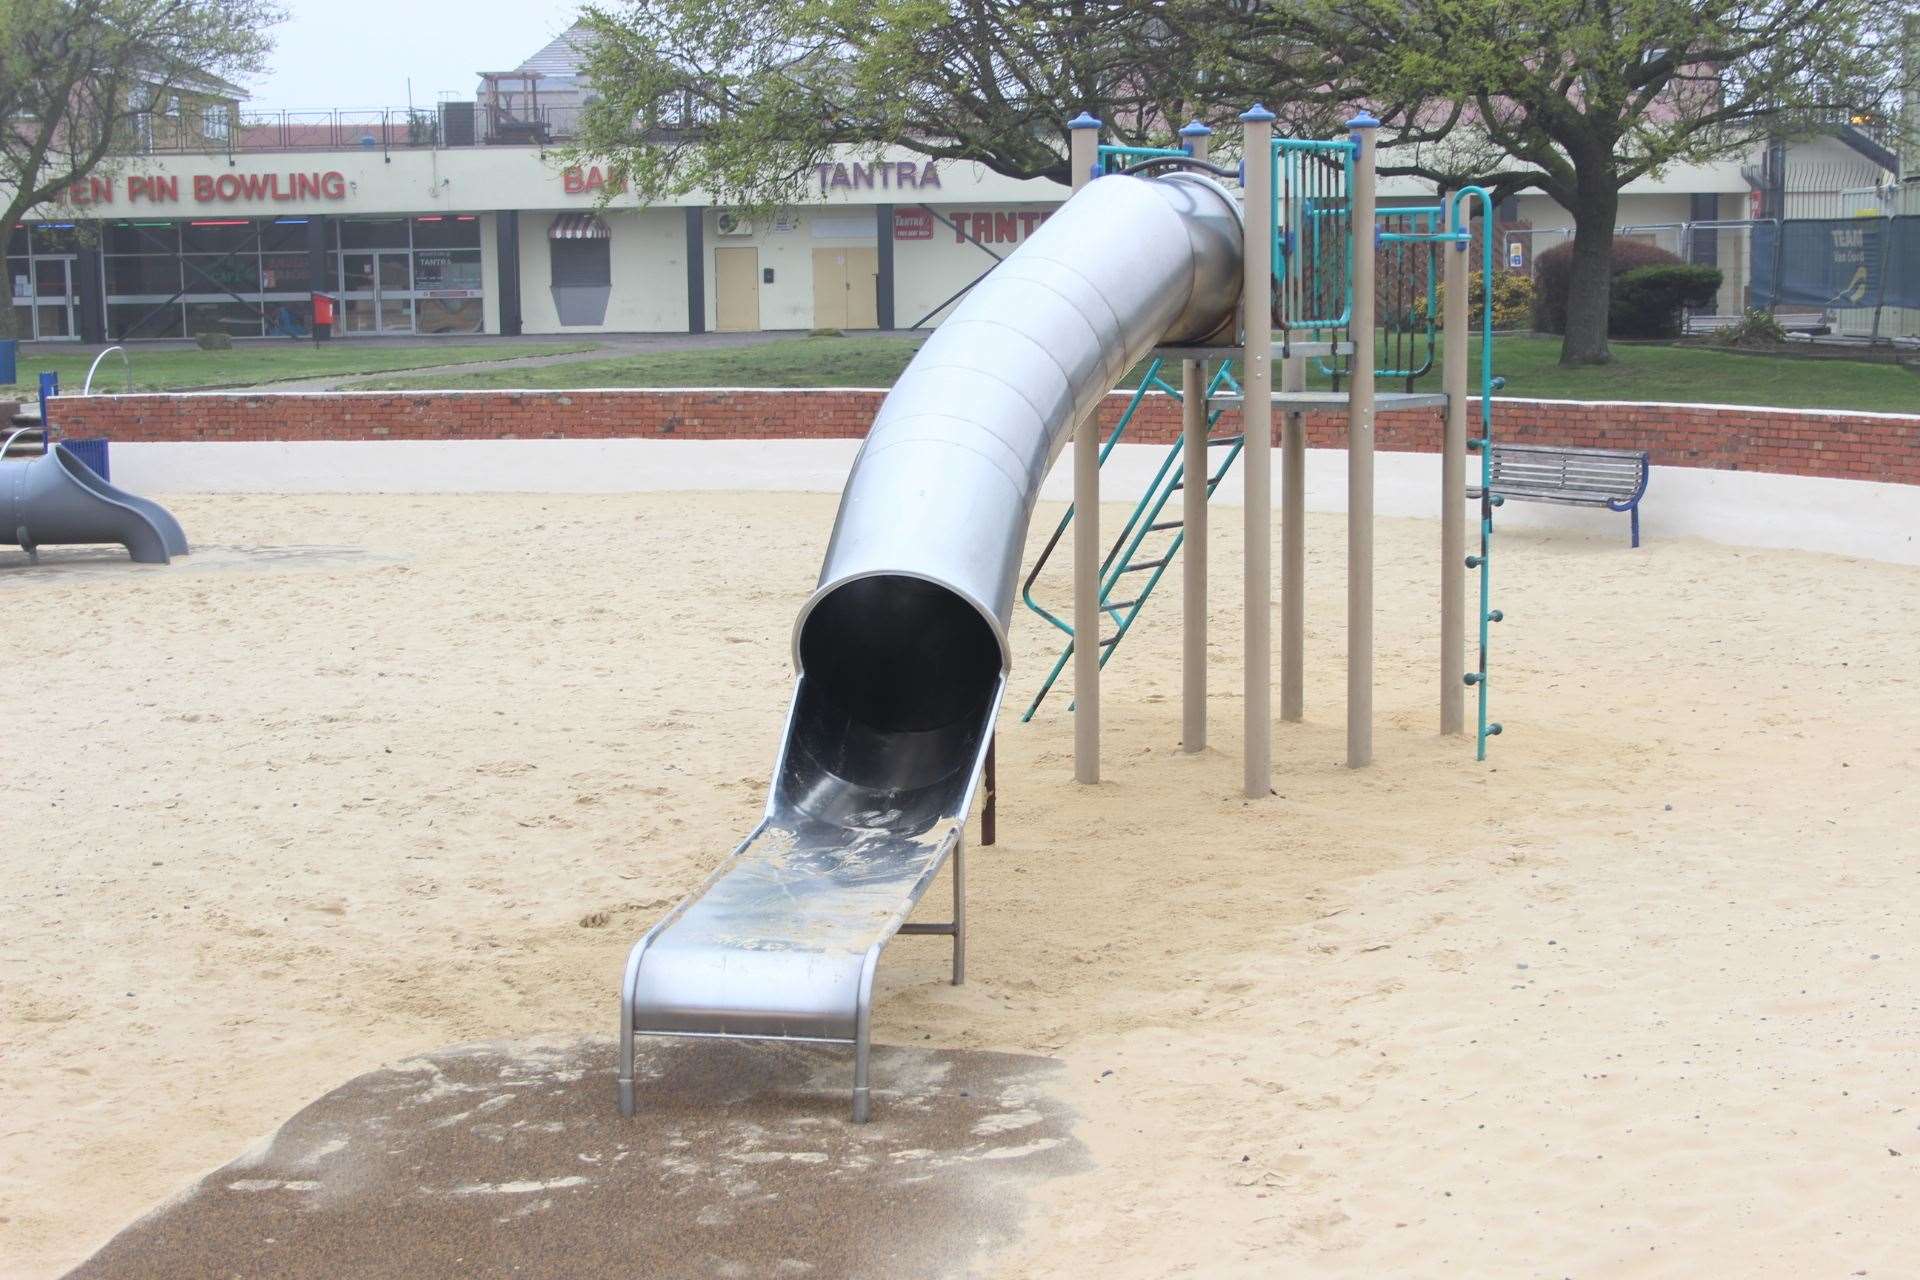 Metal slide at the sandpit children's play area at Beachfields on the seafront at Sheerness